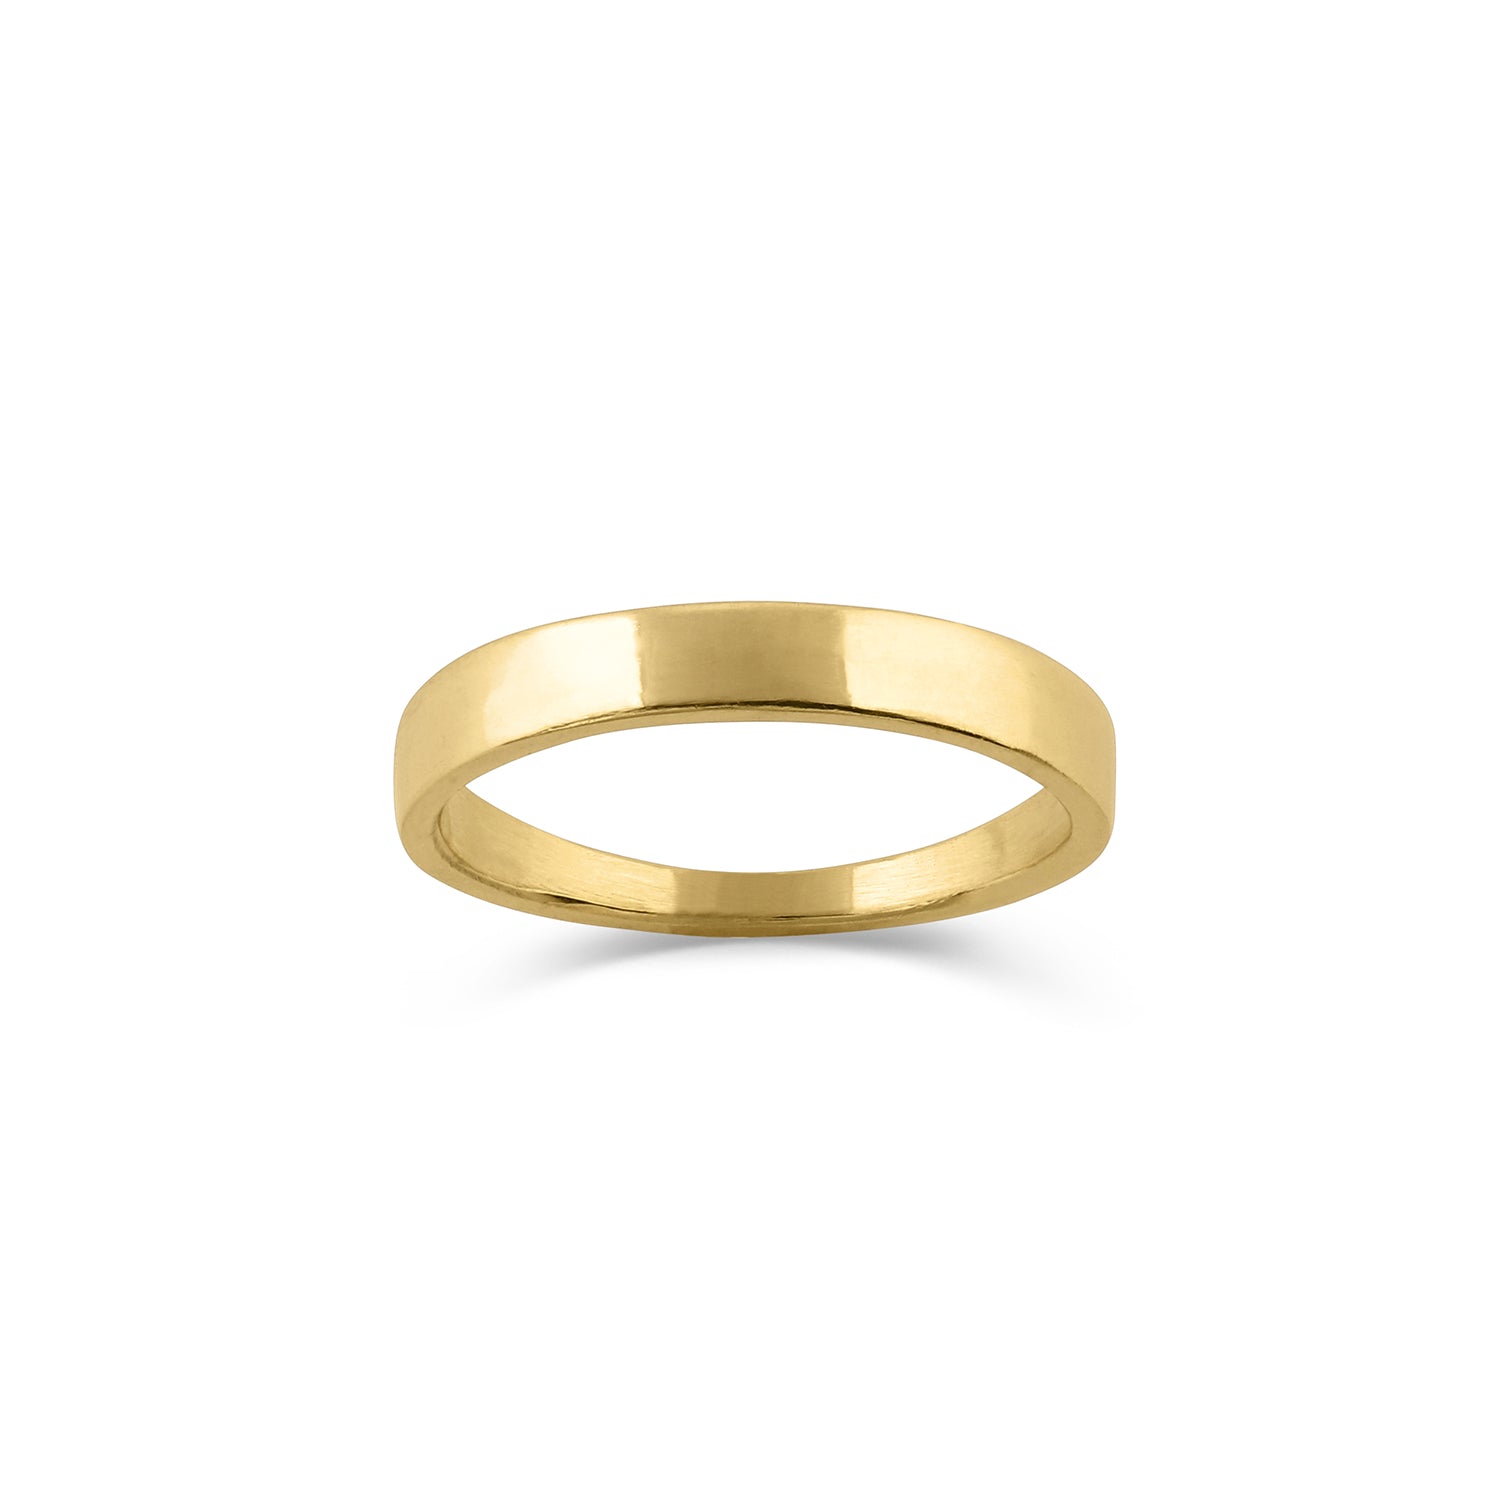 archive event gender neutral bands 5.25 / 14k yellow gold archive | Tapered Ceremonial Ring